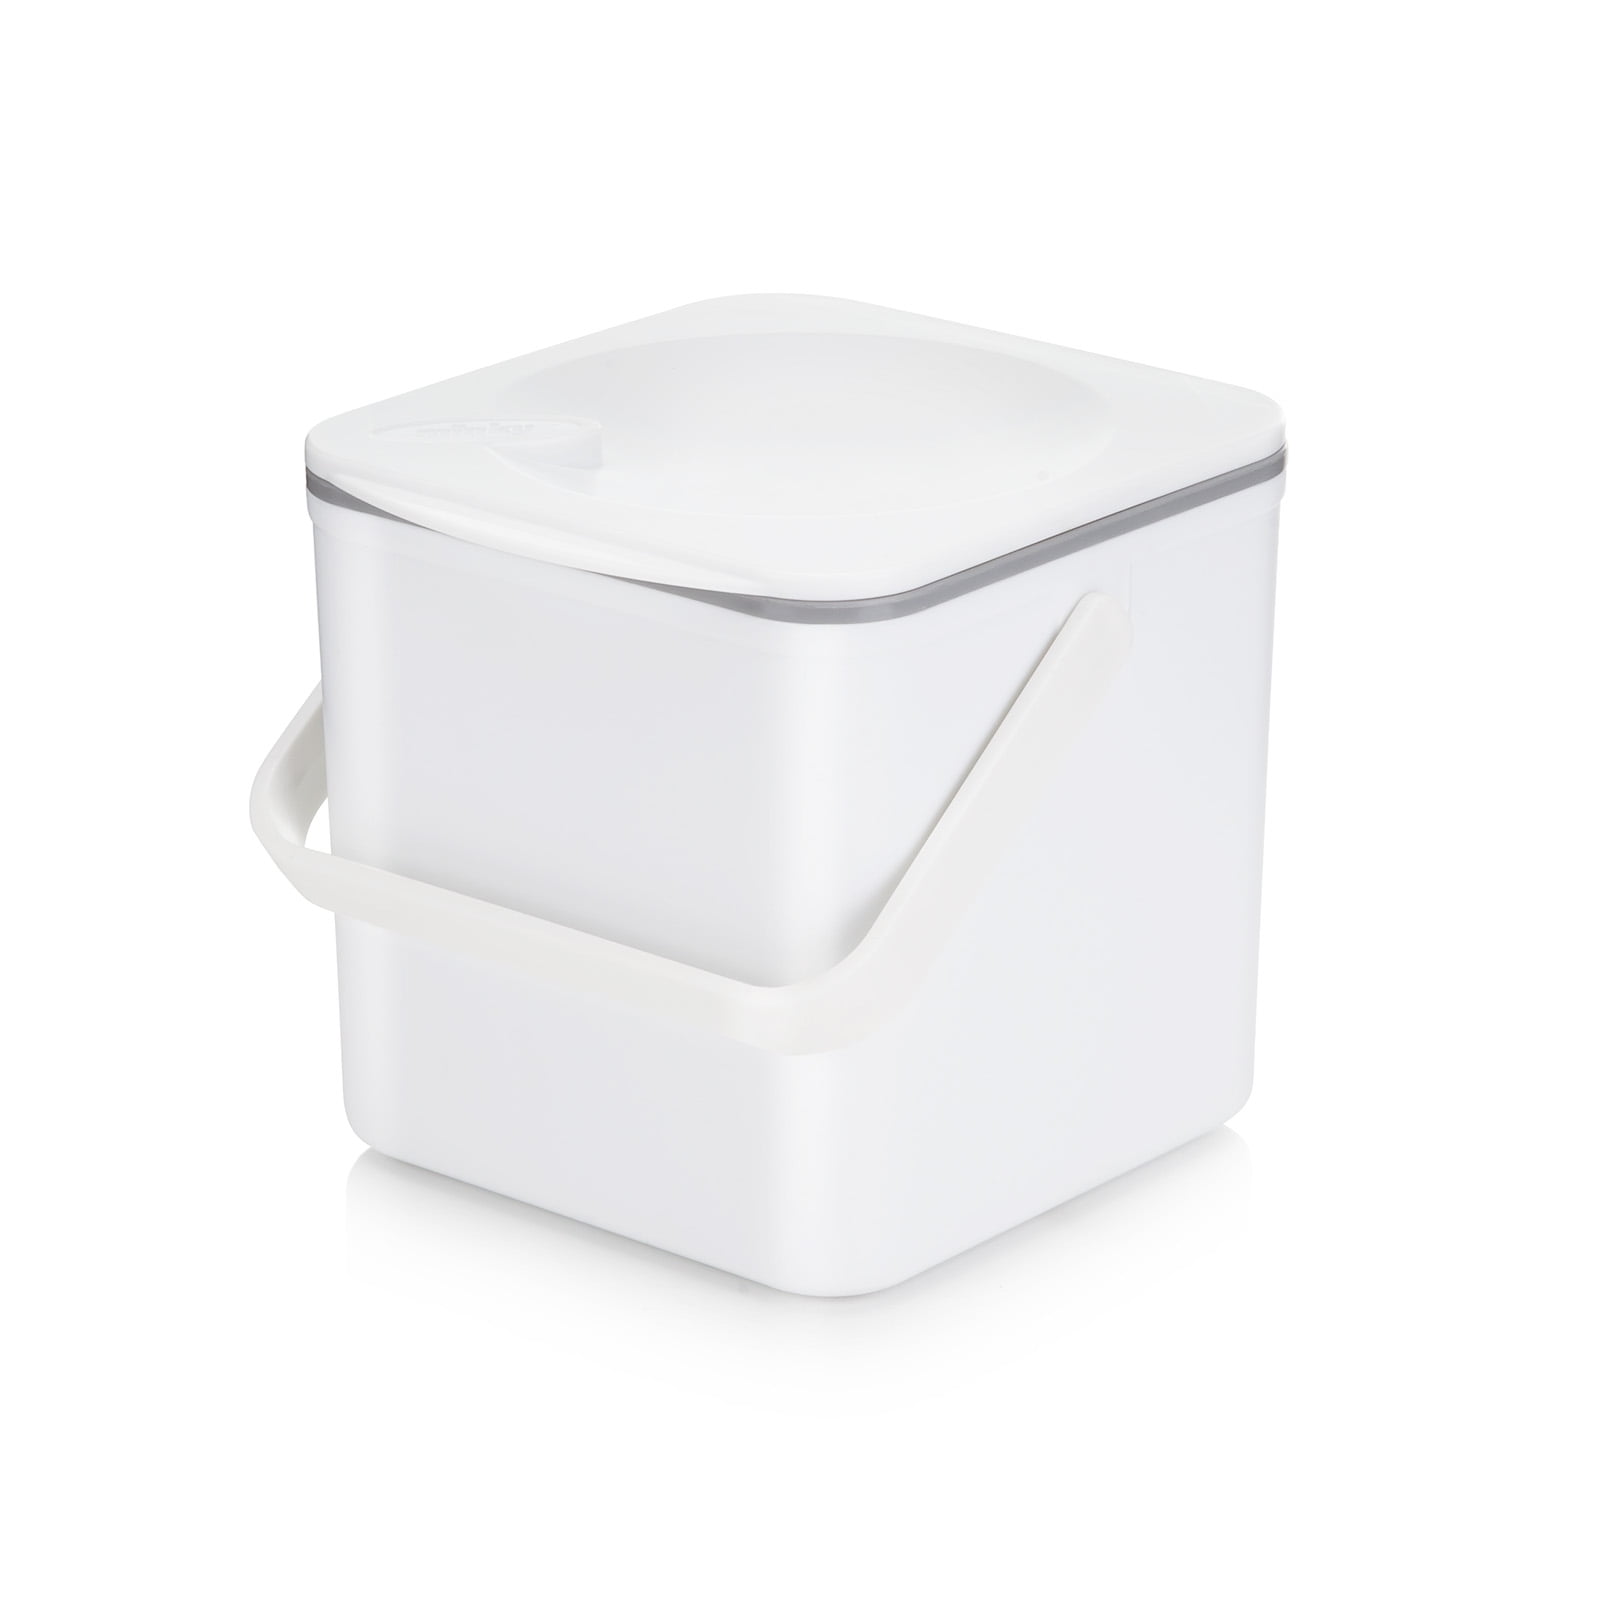 Minky Compost Kitchen Recycling Food Waste Bin Caddy 3.5L White 